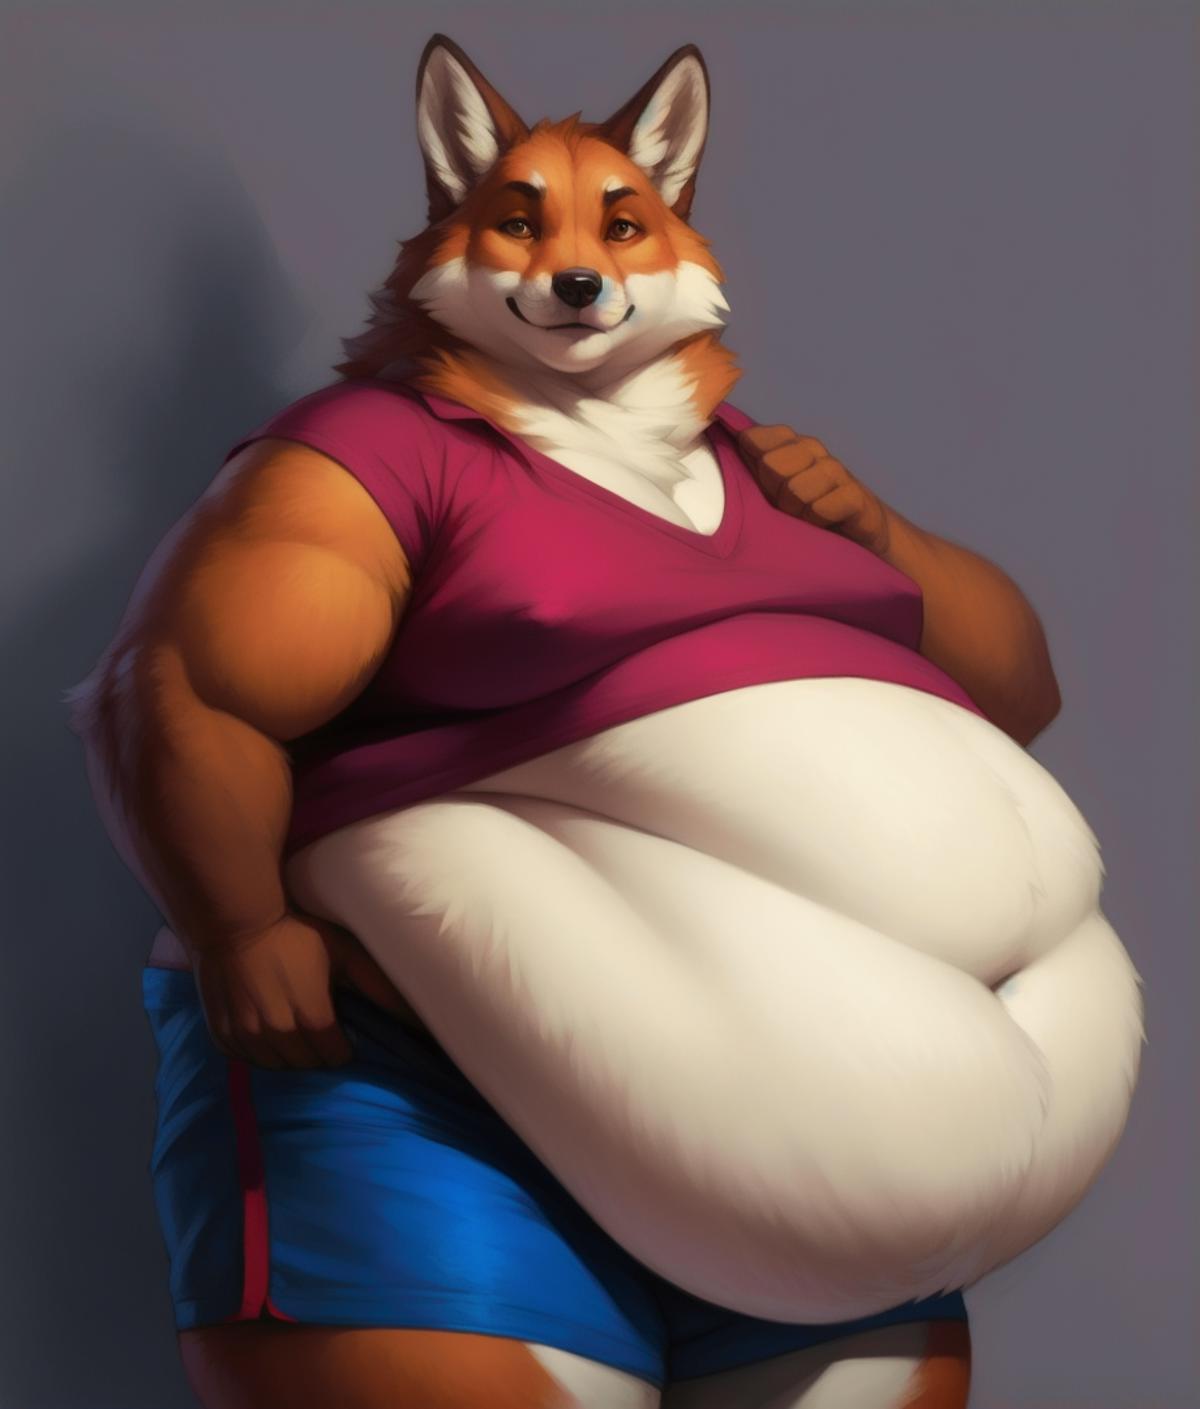 Fattest of them all image by PrOwOtogen